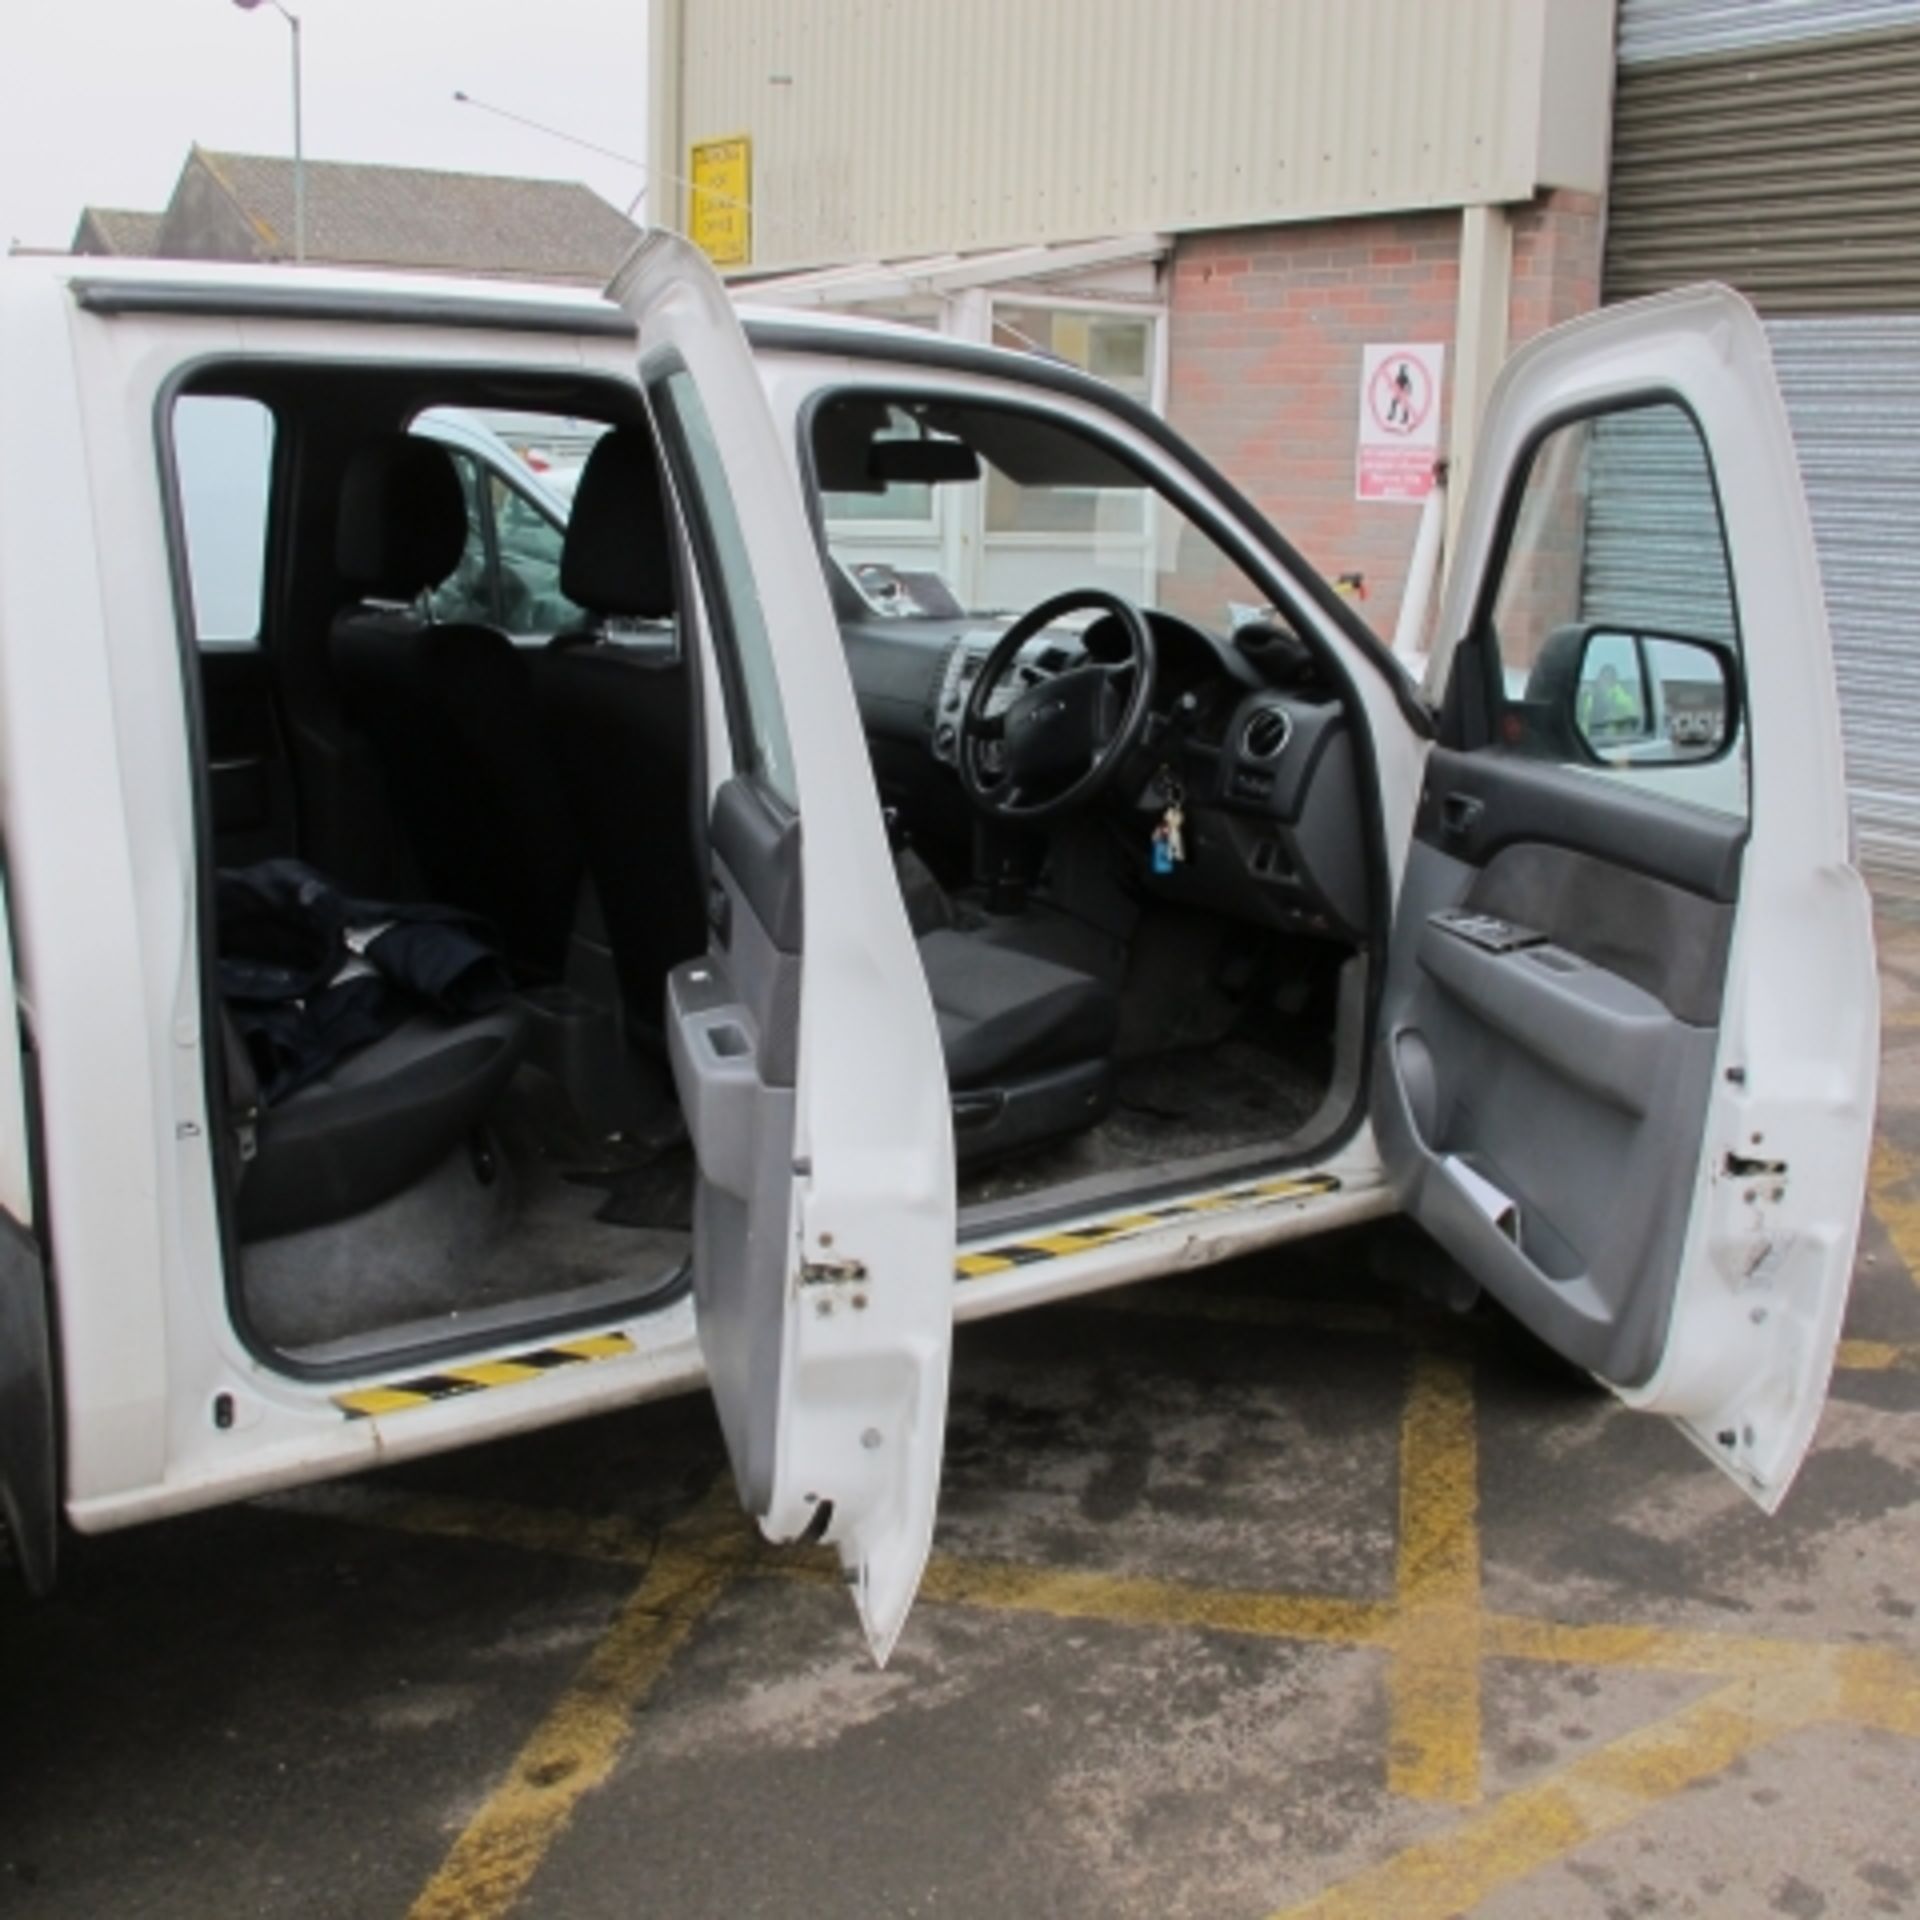 * Ford Ranger 2.5TDCI 4WD Crew Cab Pick Up with Rear Canopy & Ball Hitch, Reg YX07 WDV, - Image 8 of 9